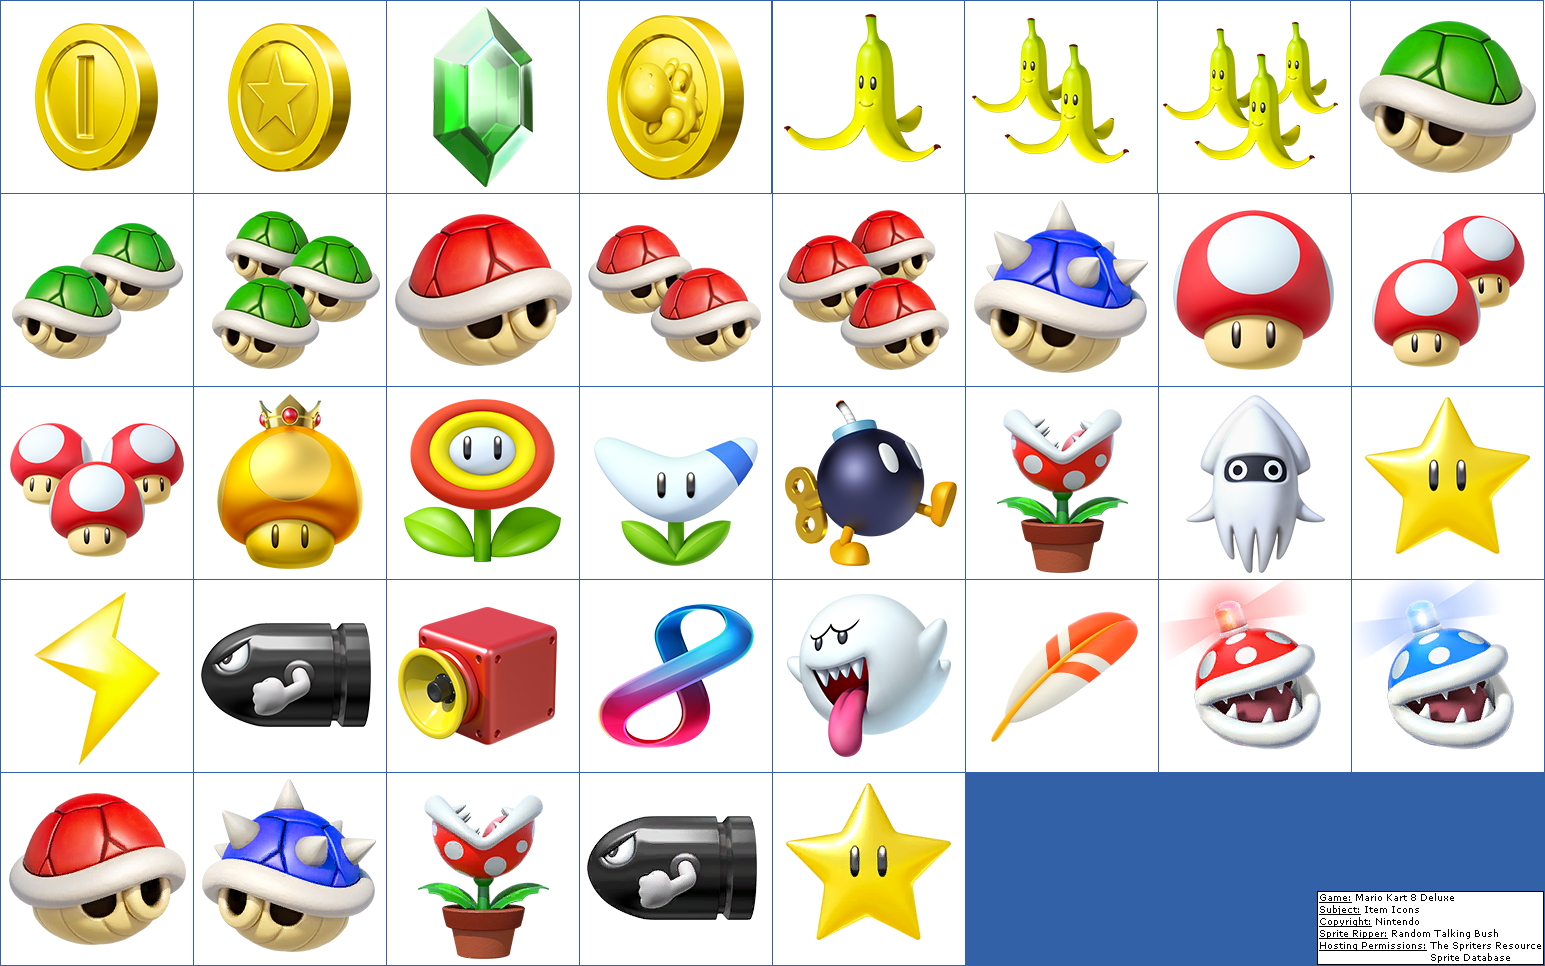 The Spriters Resource Full Sheet View Mario Kart 8 Deluxe Item Icons 3665